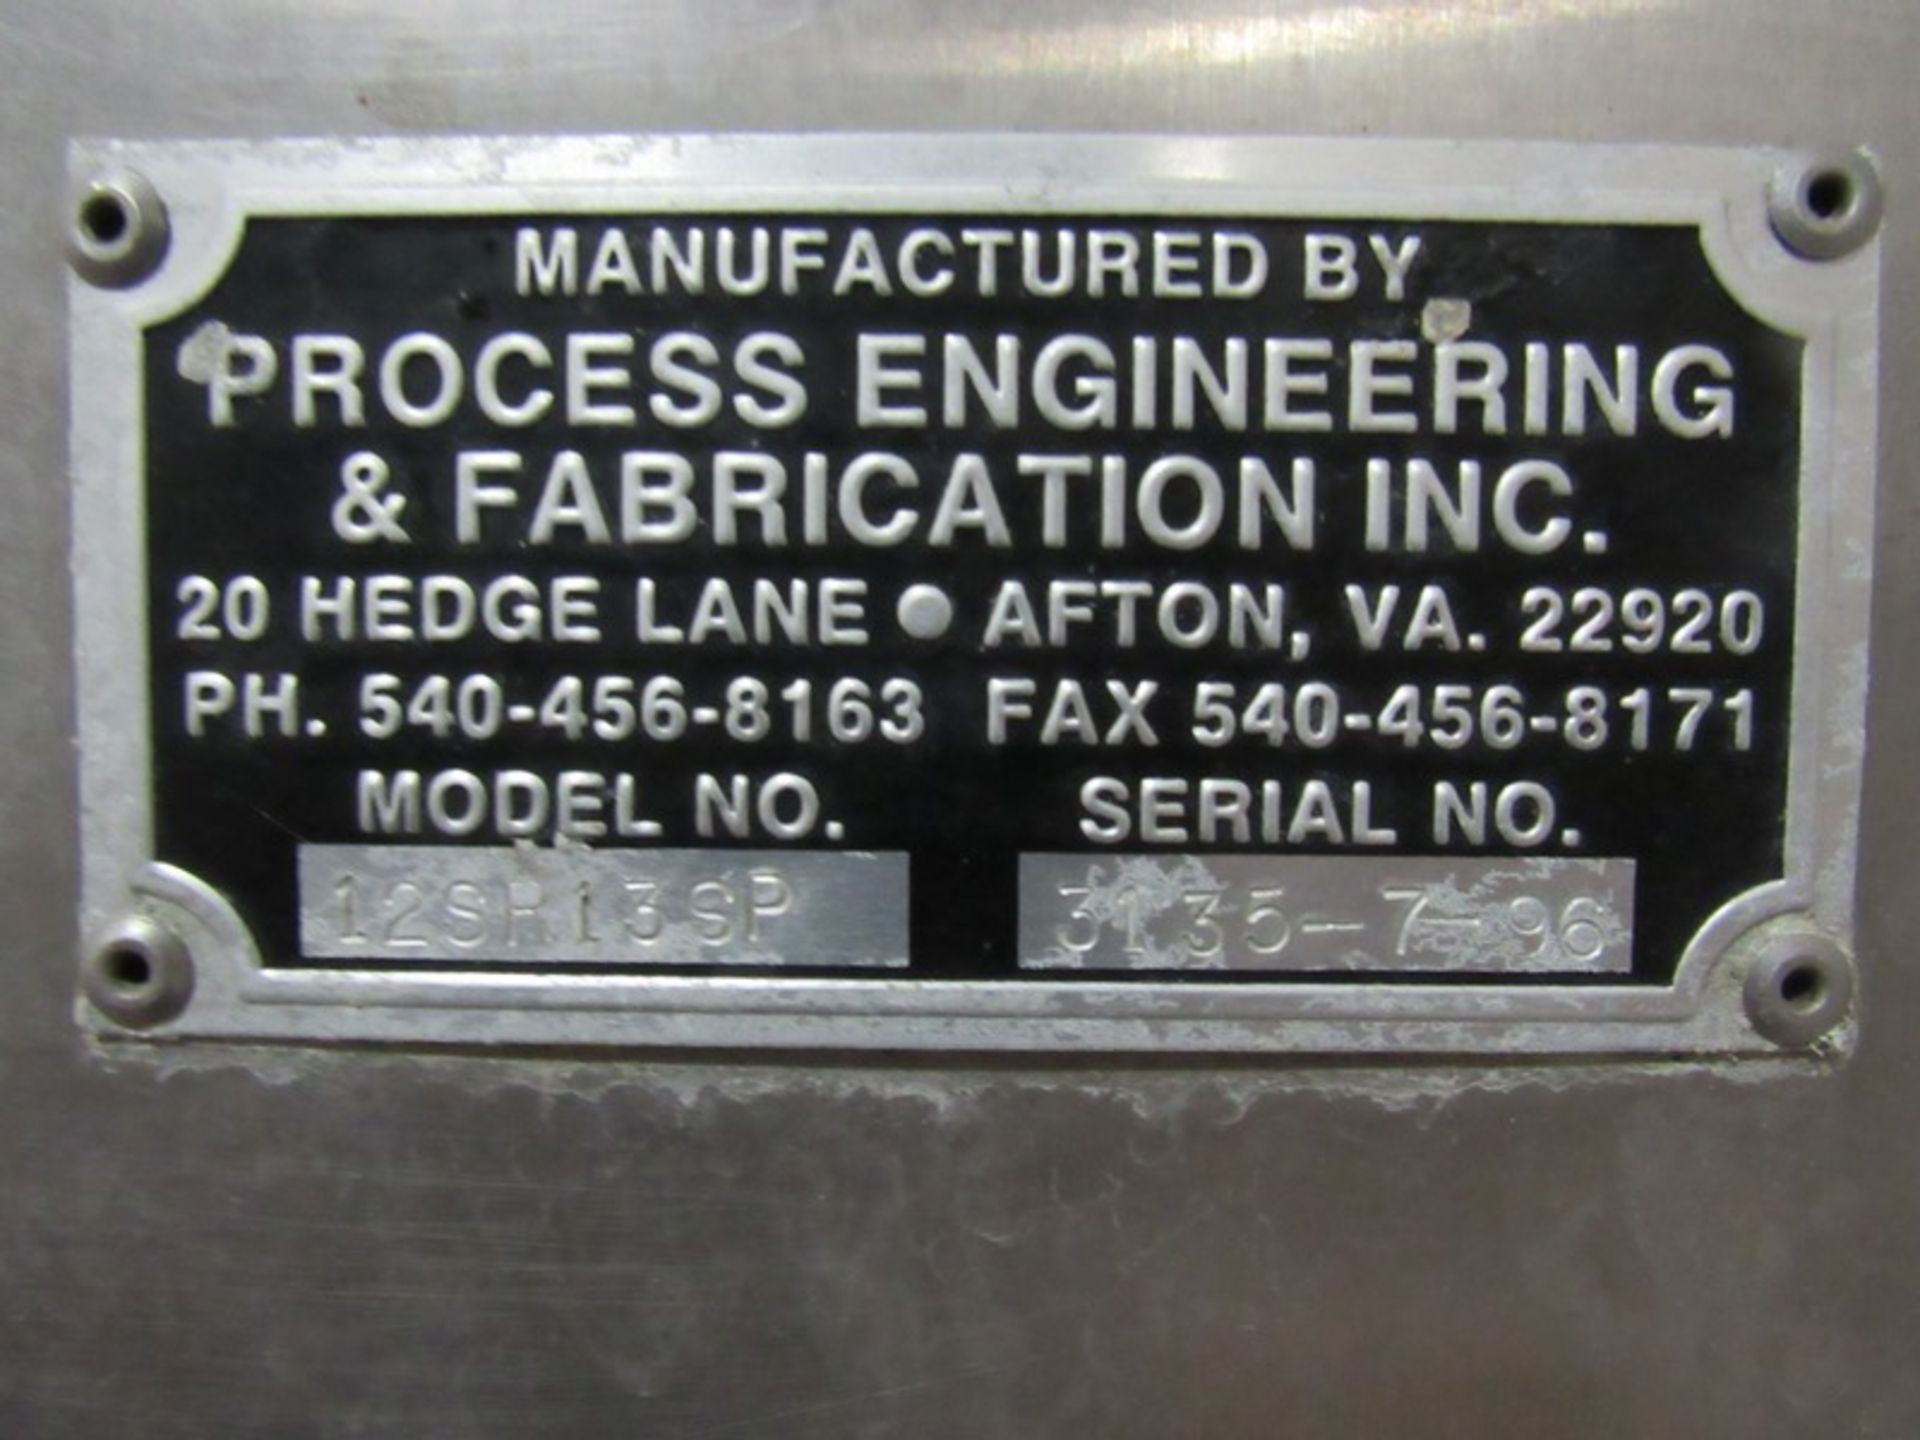 Process Engineering & Fabrication Mdl. 12SR13SP Stainless Steel Spiral Freezer, Ser. #3135-7-96, - Image 11 of 11